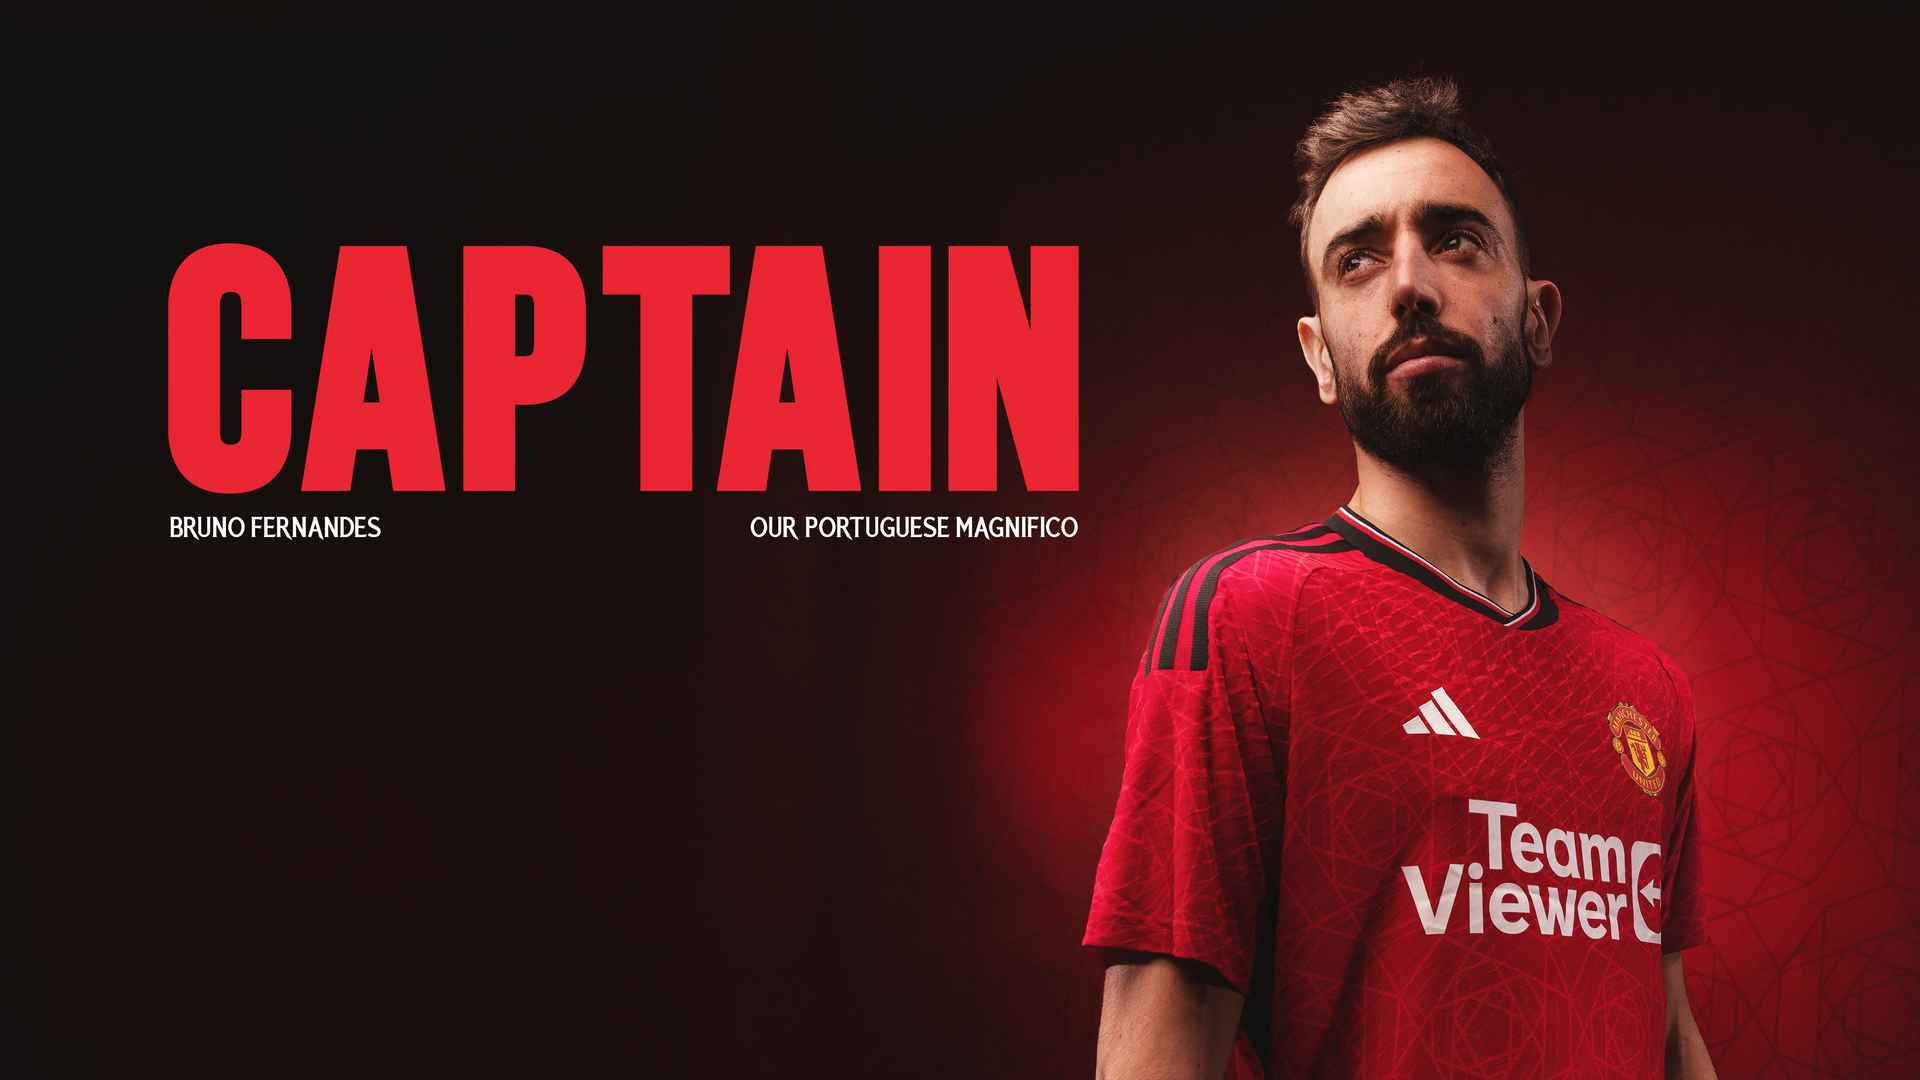 Bruno Fernandes named new Manchester United captain after Harry Maguire was stripped of the role